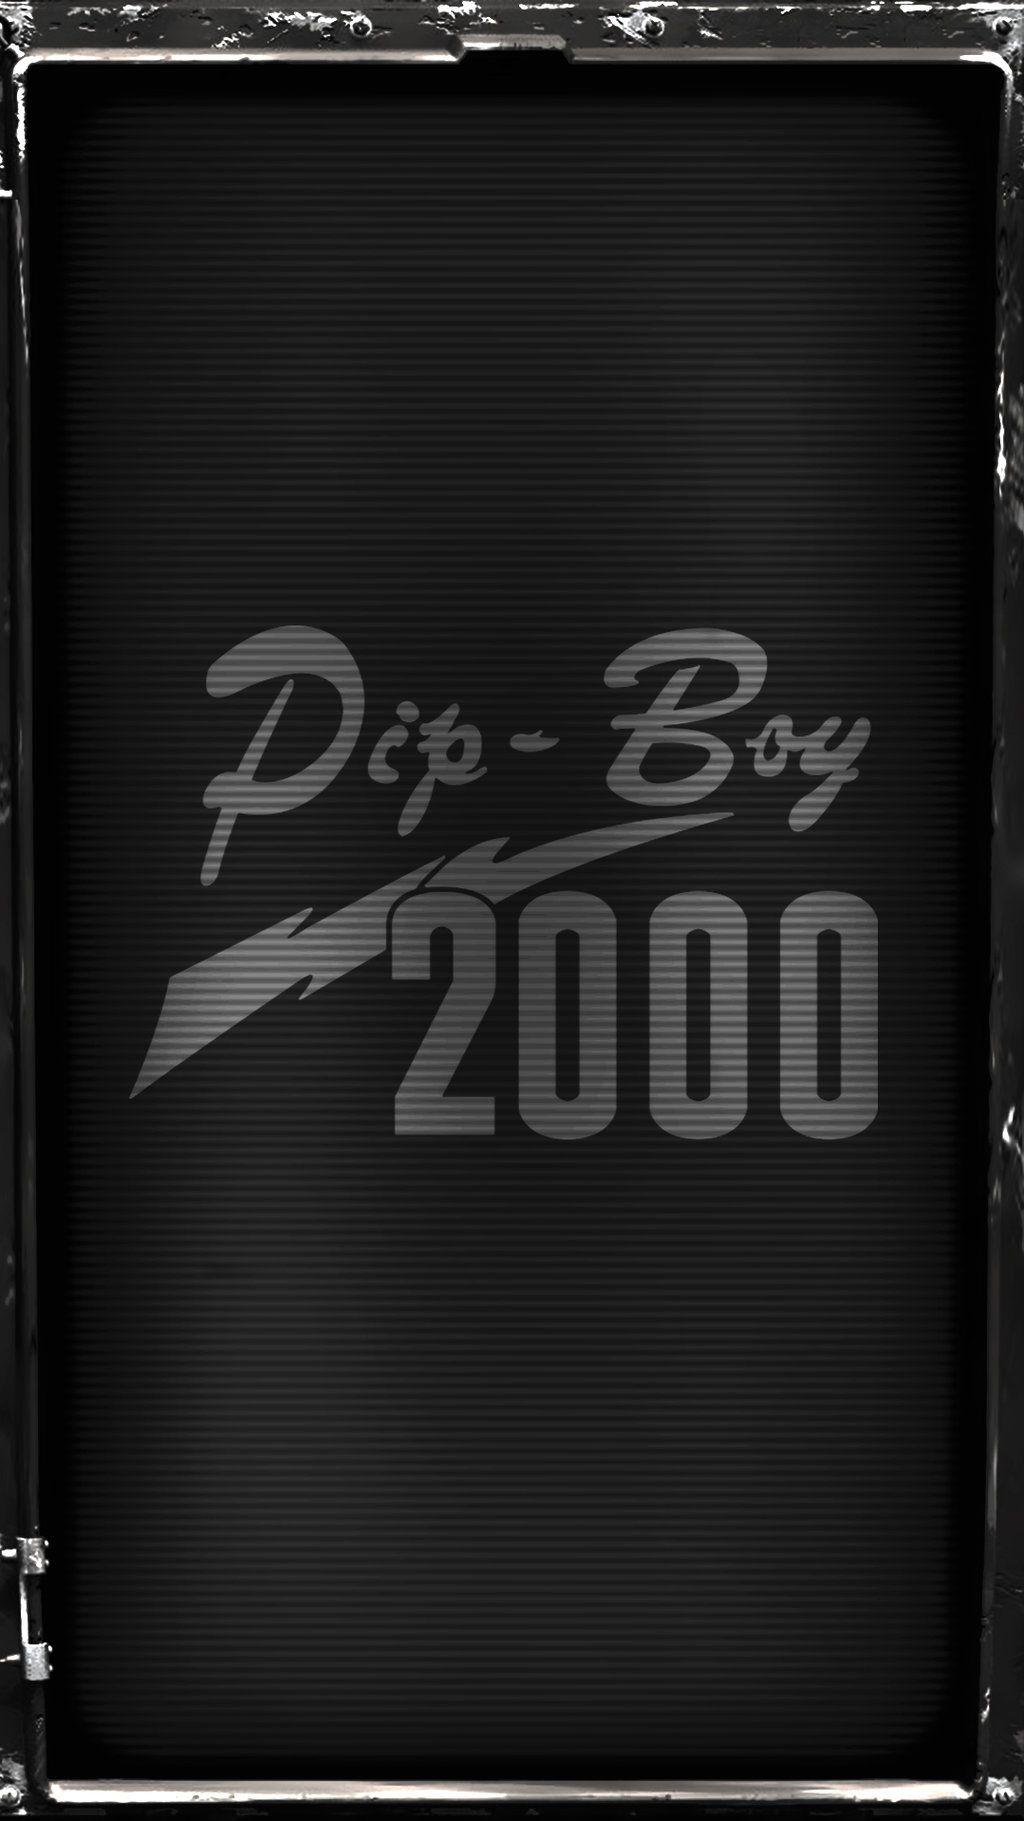 Fallout Pip Boy Iphone Wallpapers Top Free Fallout Pip Boy Iphone Backgrounds Wallpaperaccess